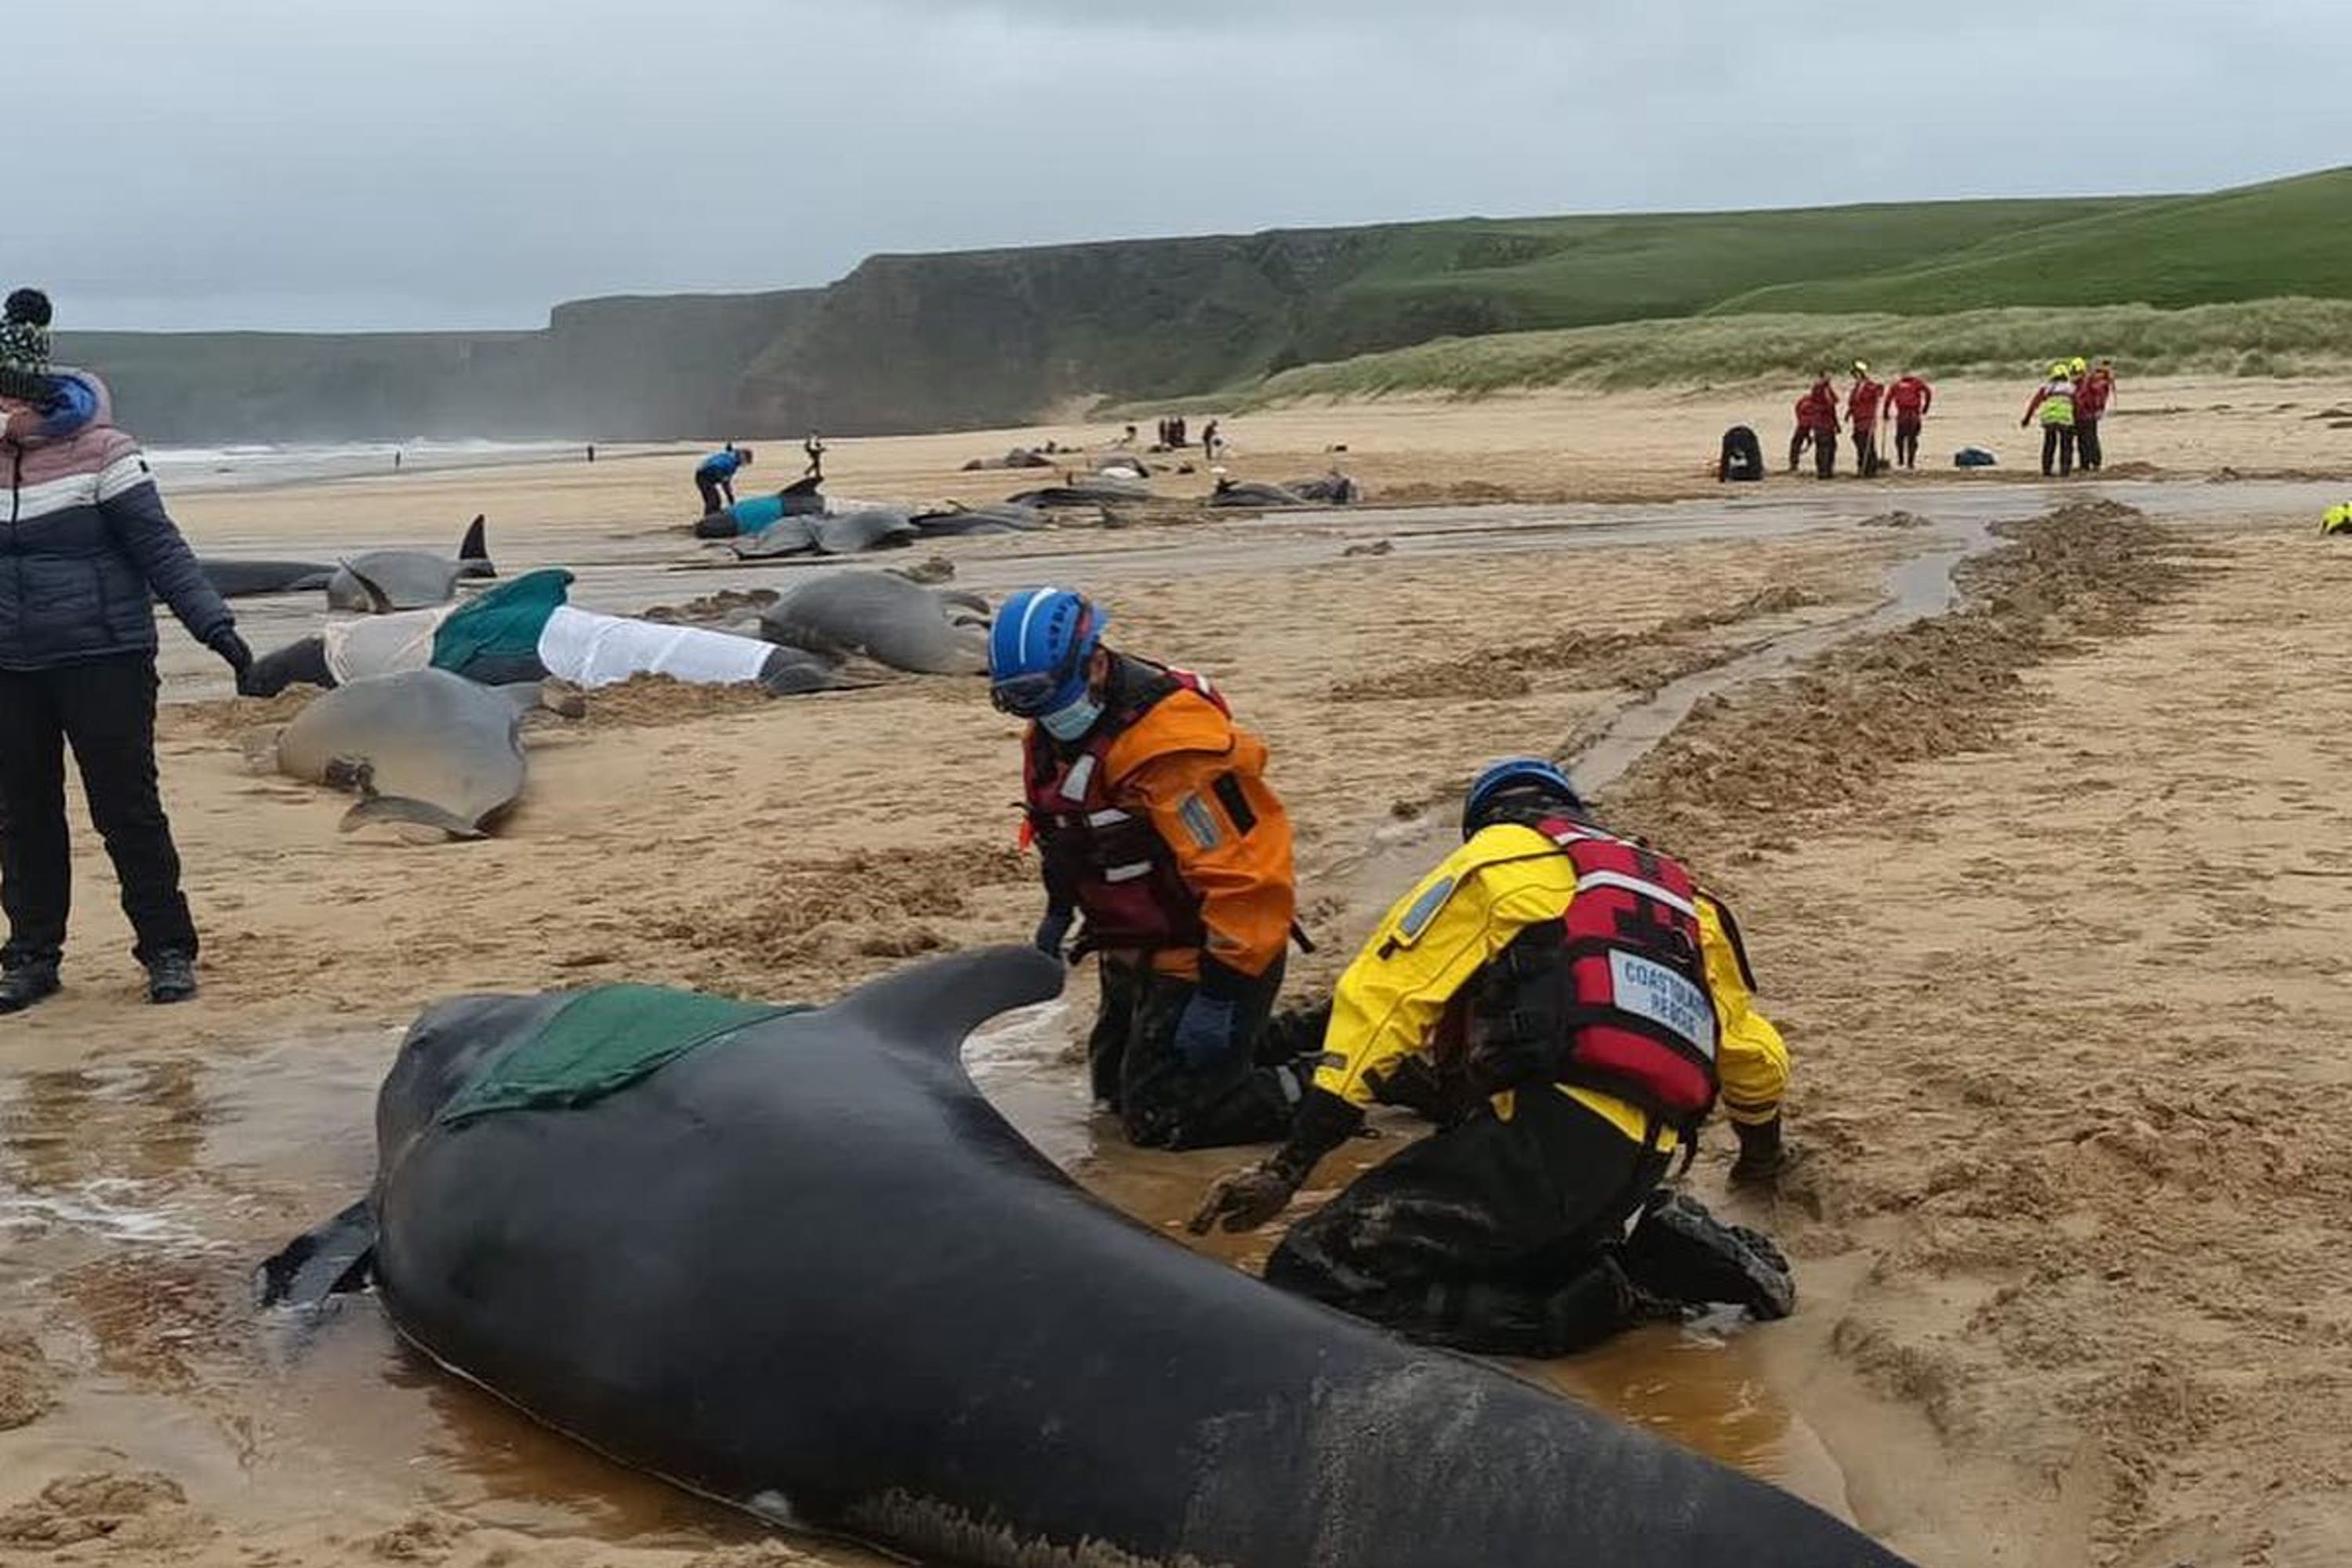 55 whales were washed ashore on the Isle of Lewis in a mass stranding (BDMLR/PA)